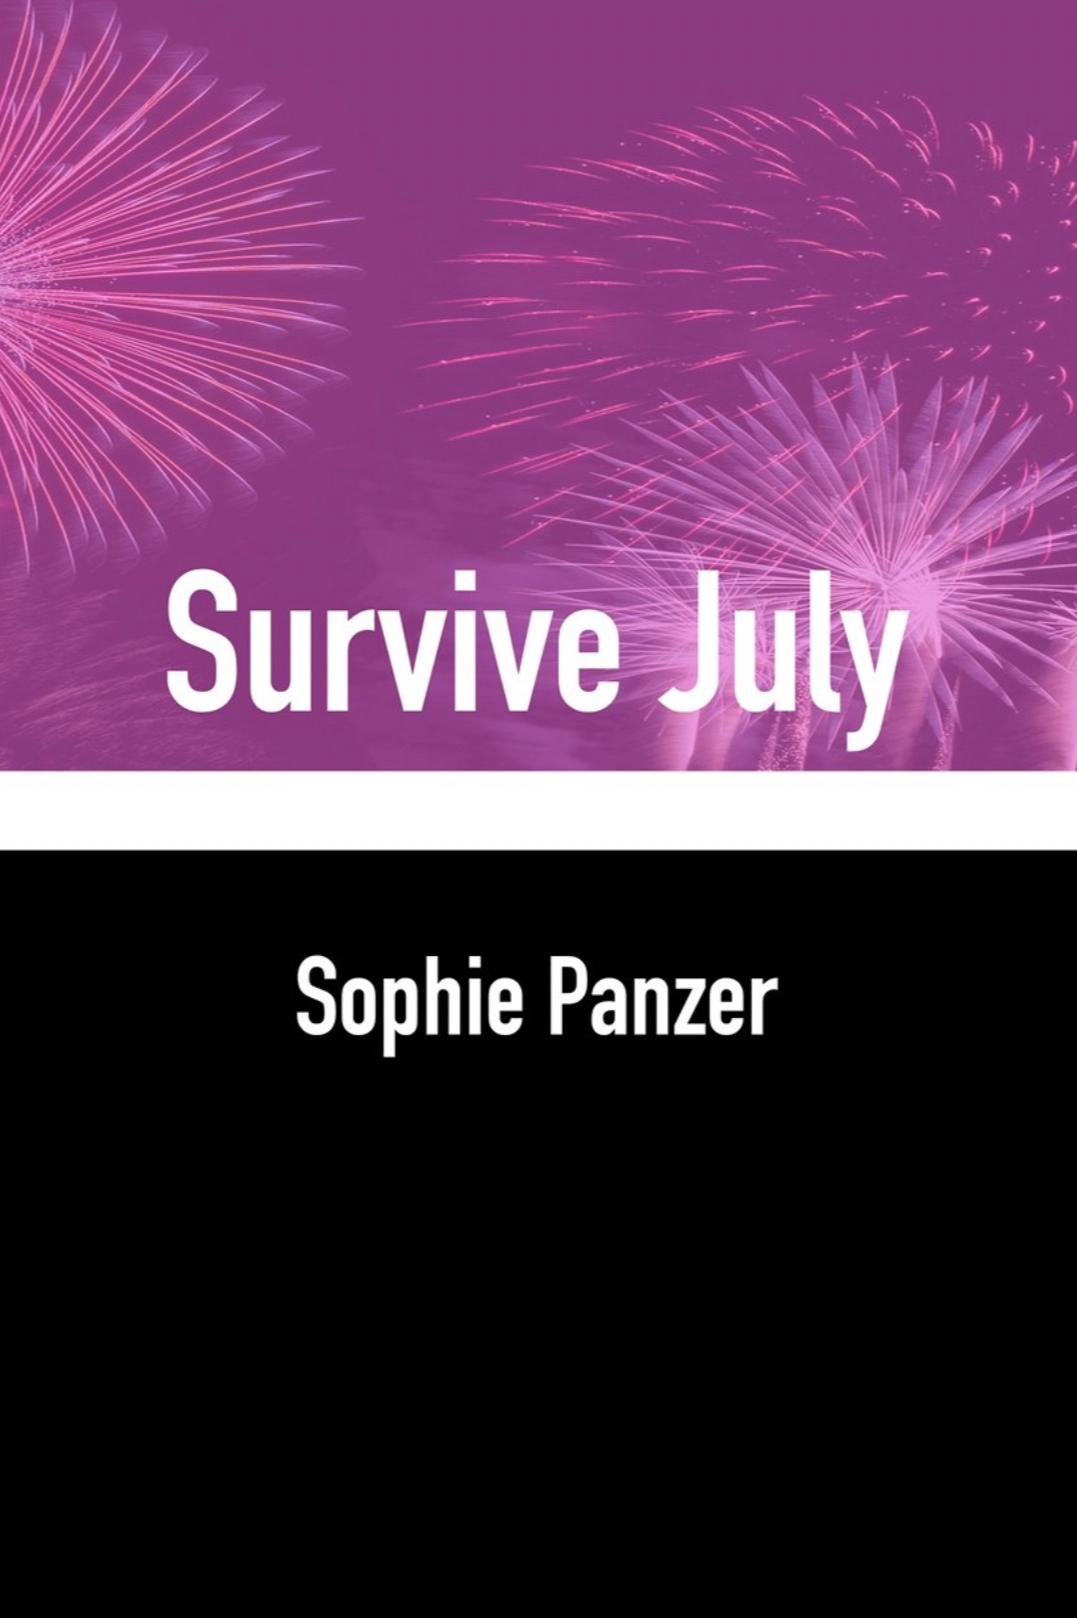 Book cover of Survive July by Sophie Panzer